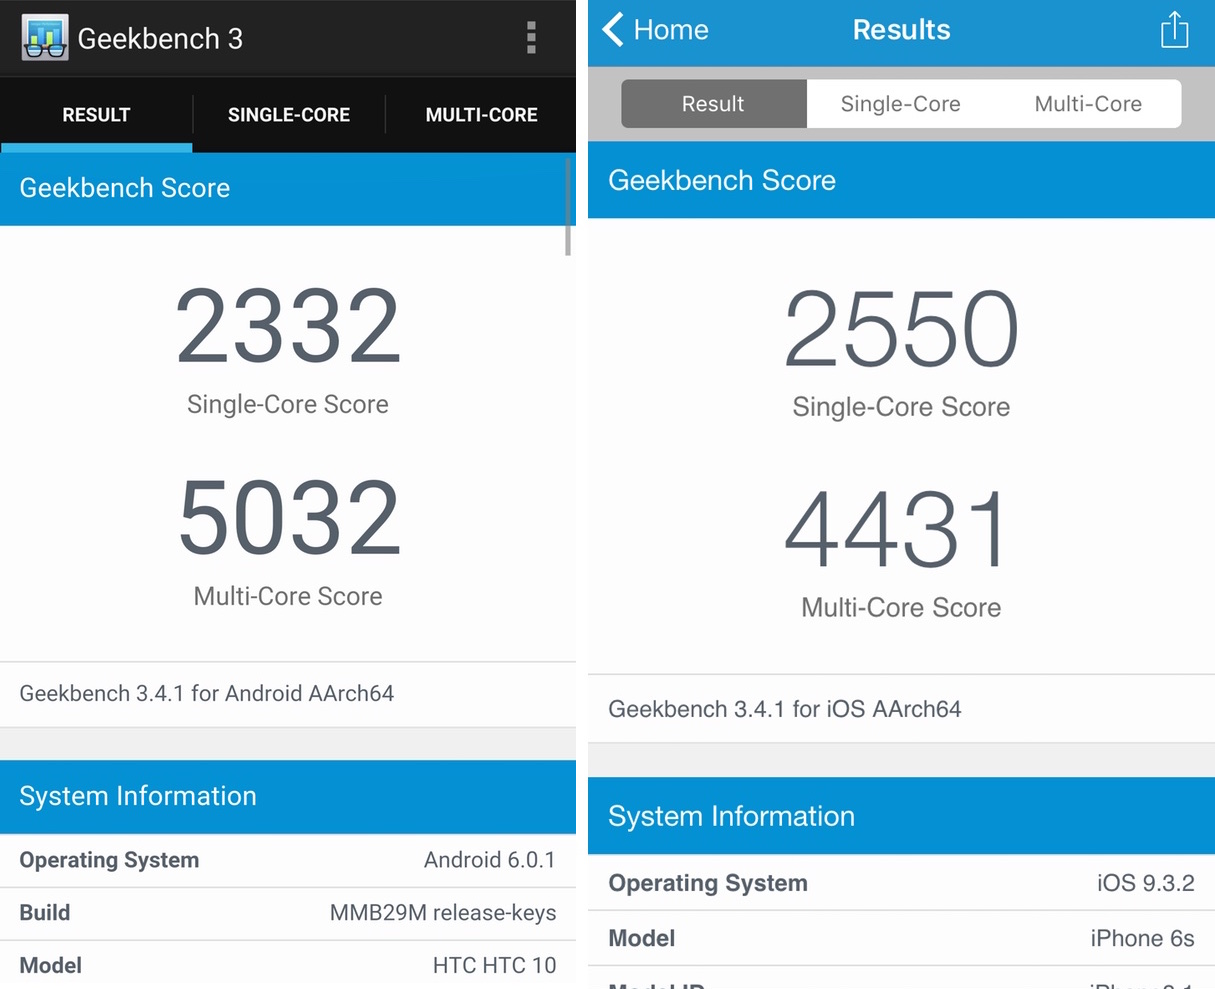 HTC 10 vs iPhone 6s Benchmarks